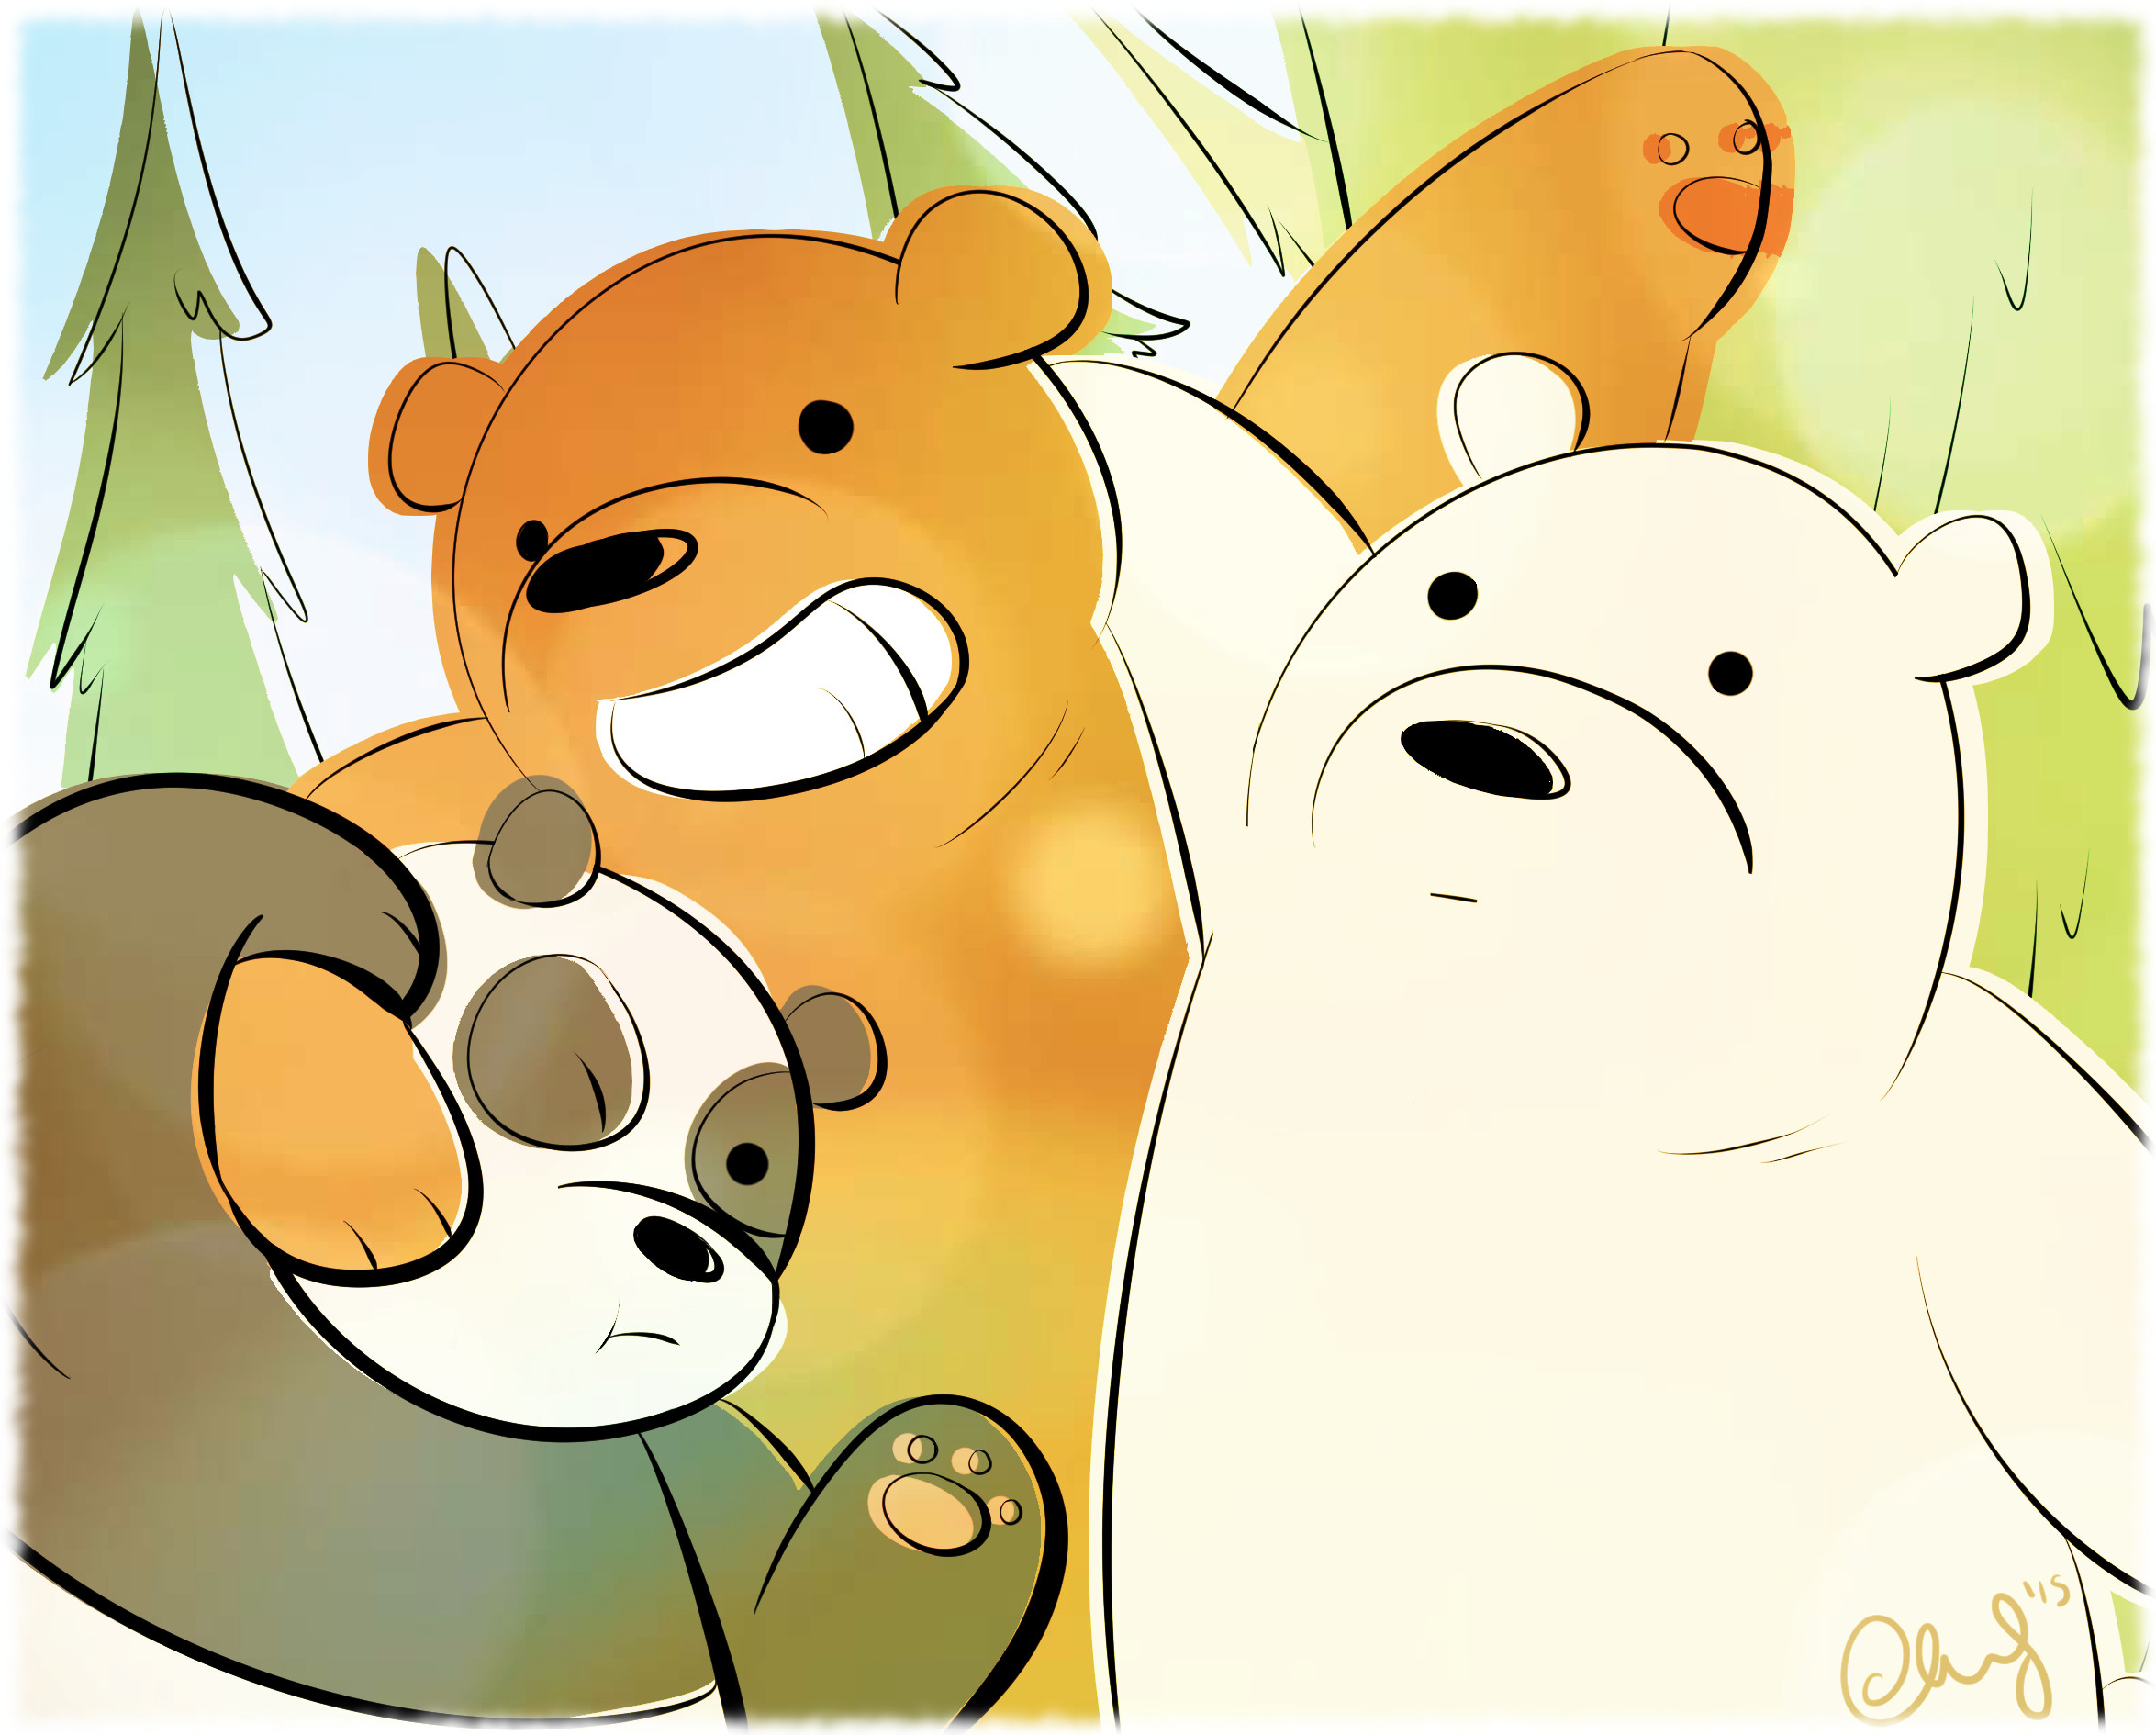 2349x1890 We Bare Bears by ccucco We Bare Bears by ccucco